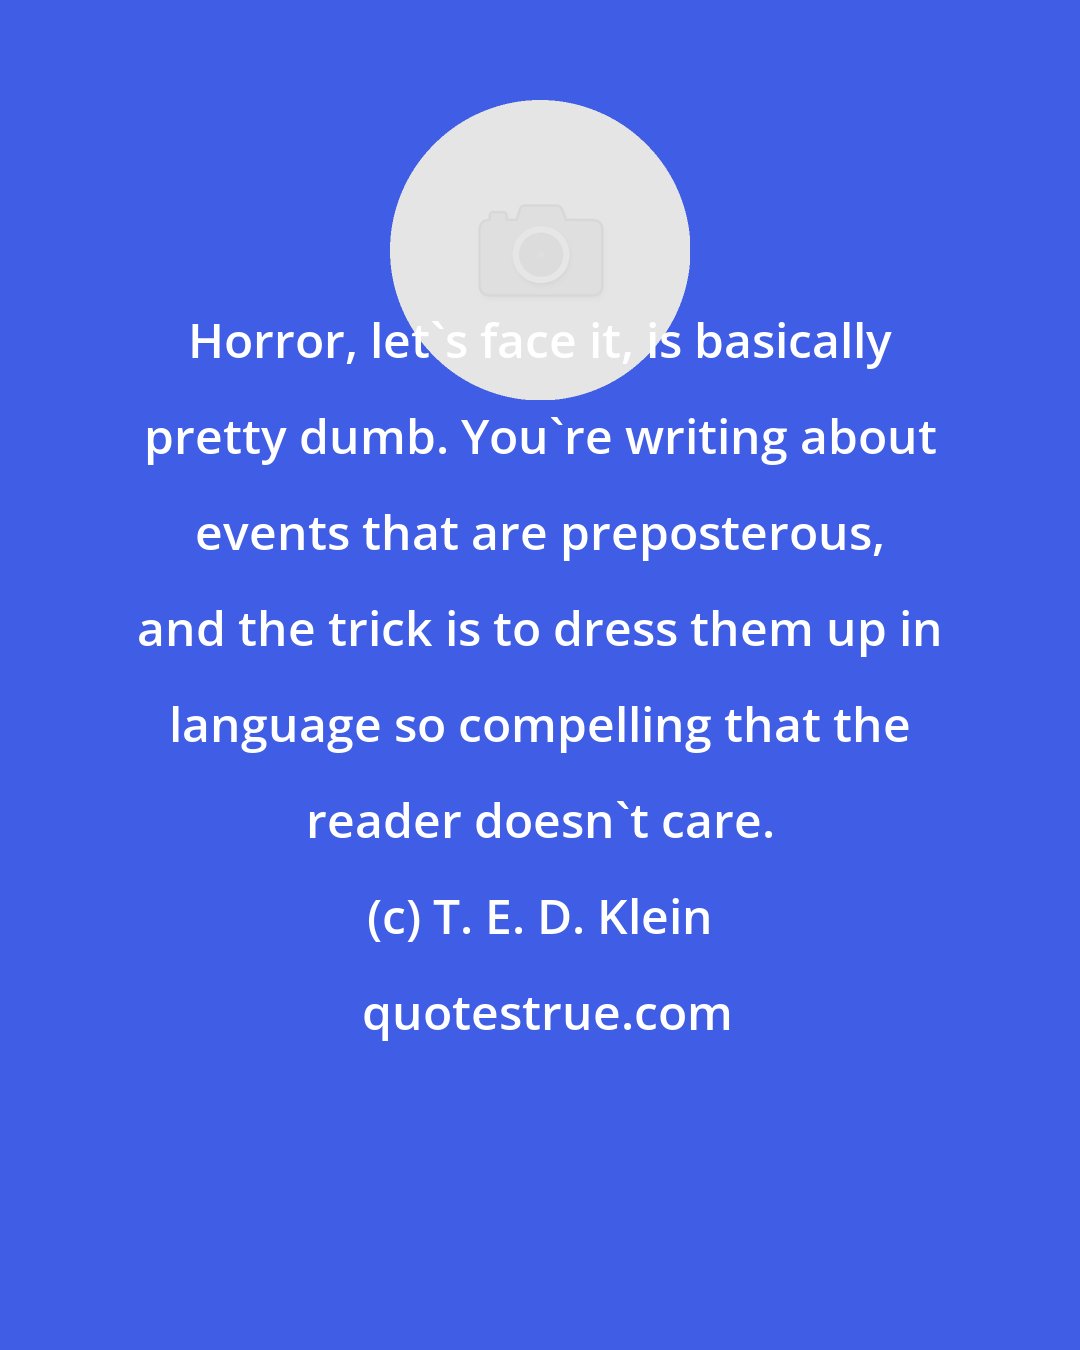 T. E. D. Klein: Horror, let's face it, is basically pretty dumb. You're writing about events that are preposterous, and the trick is to dress them up in language so compelling that the reader doesn't care.